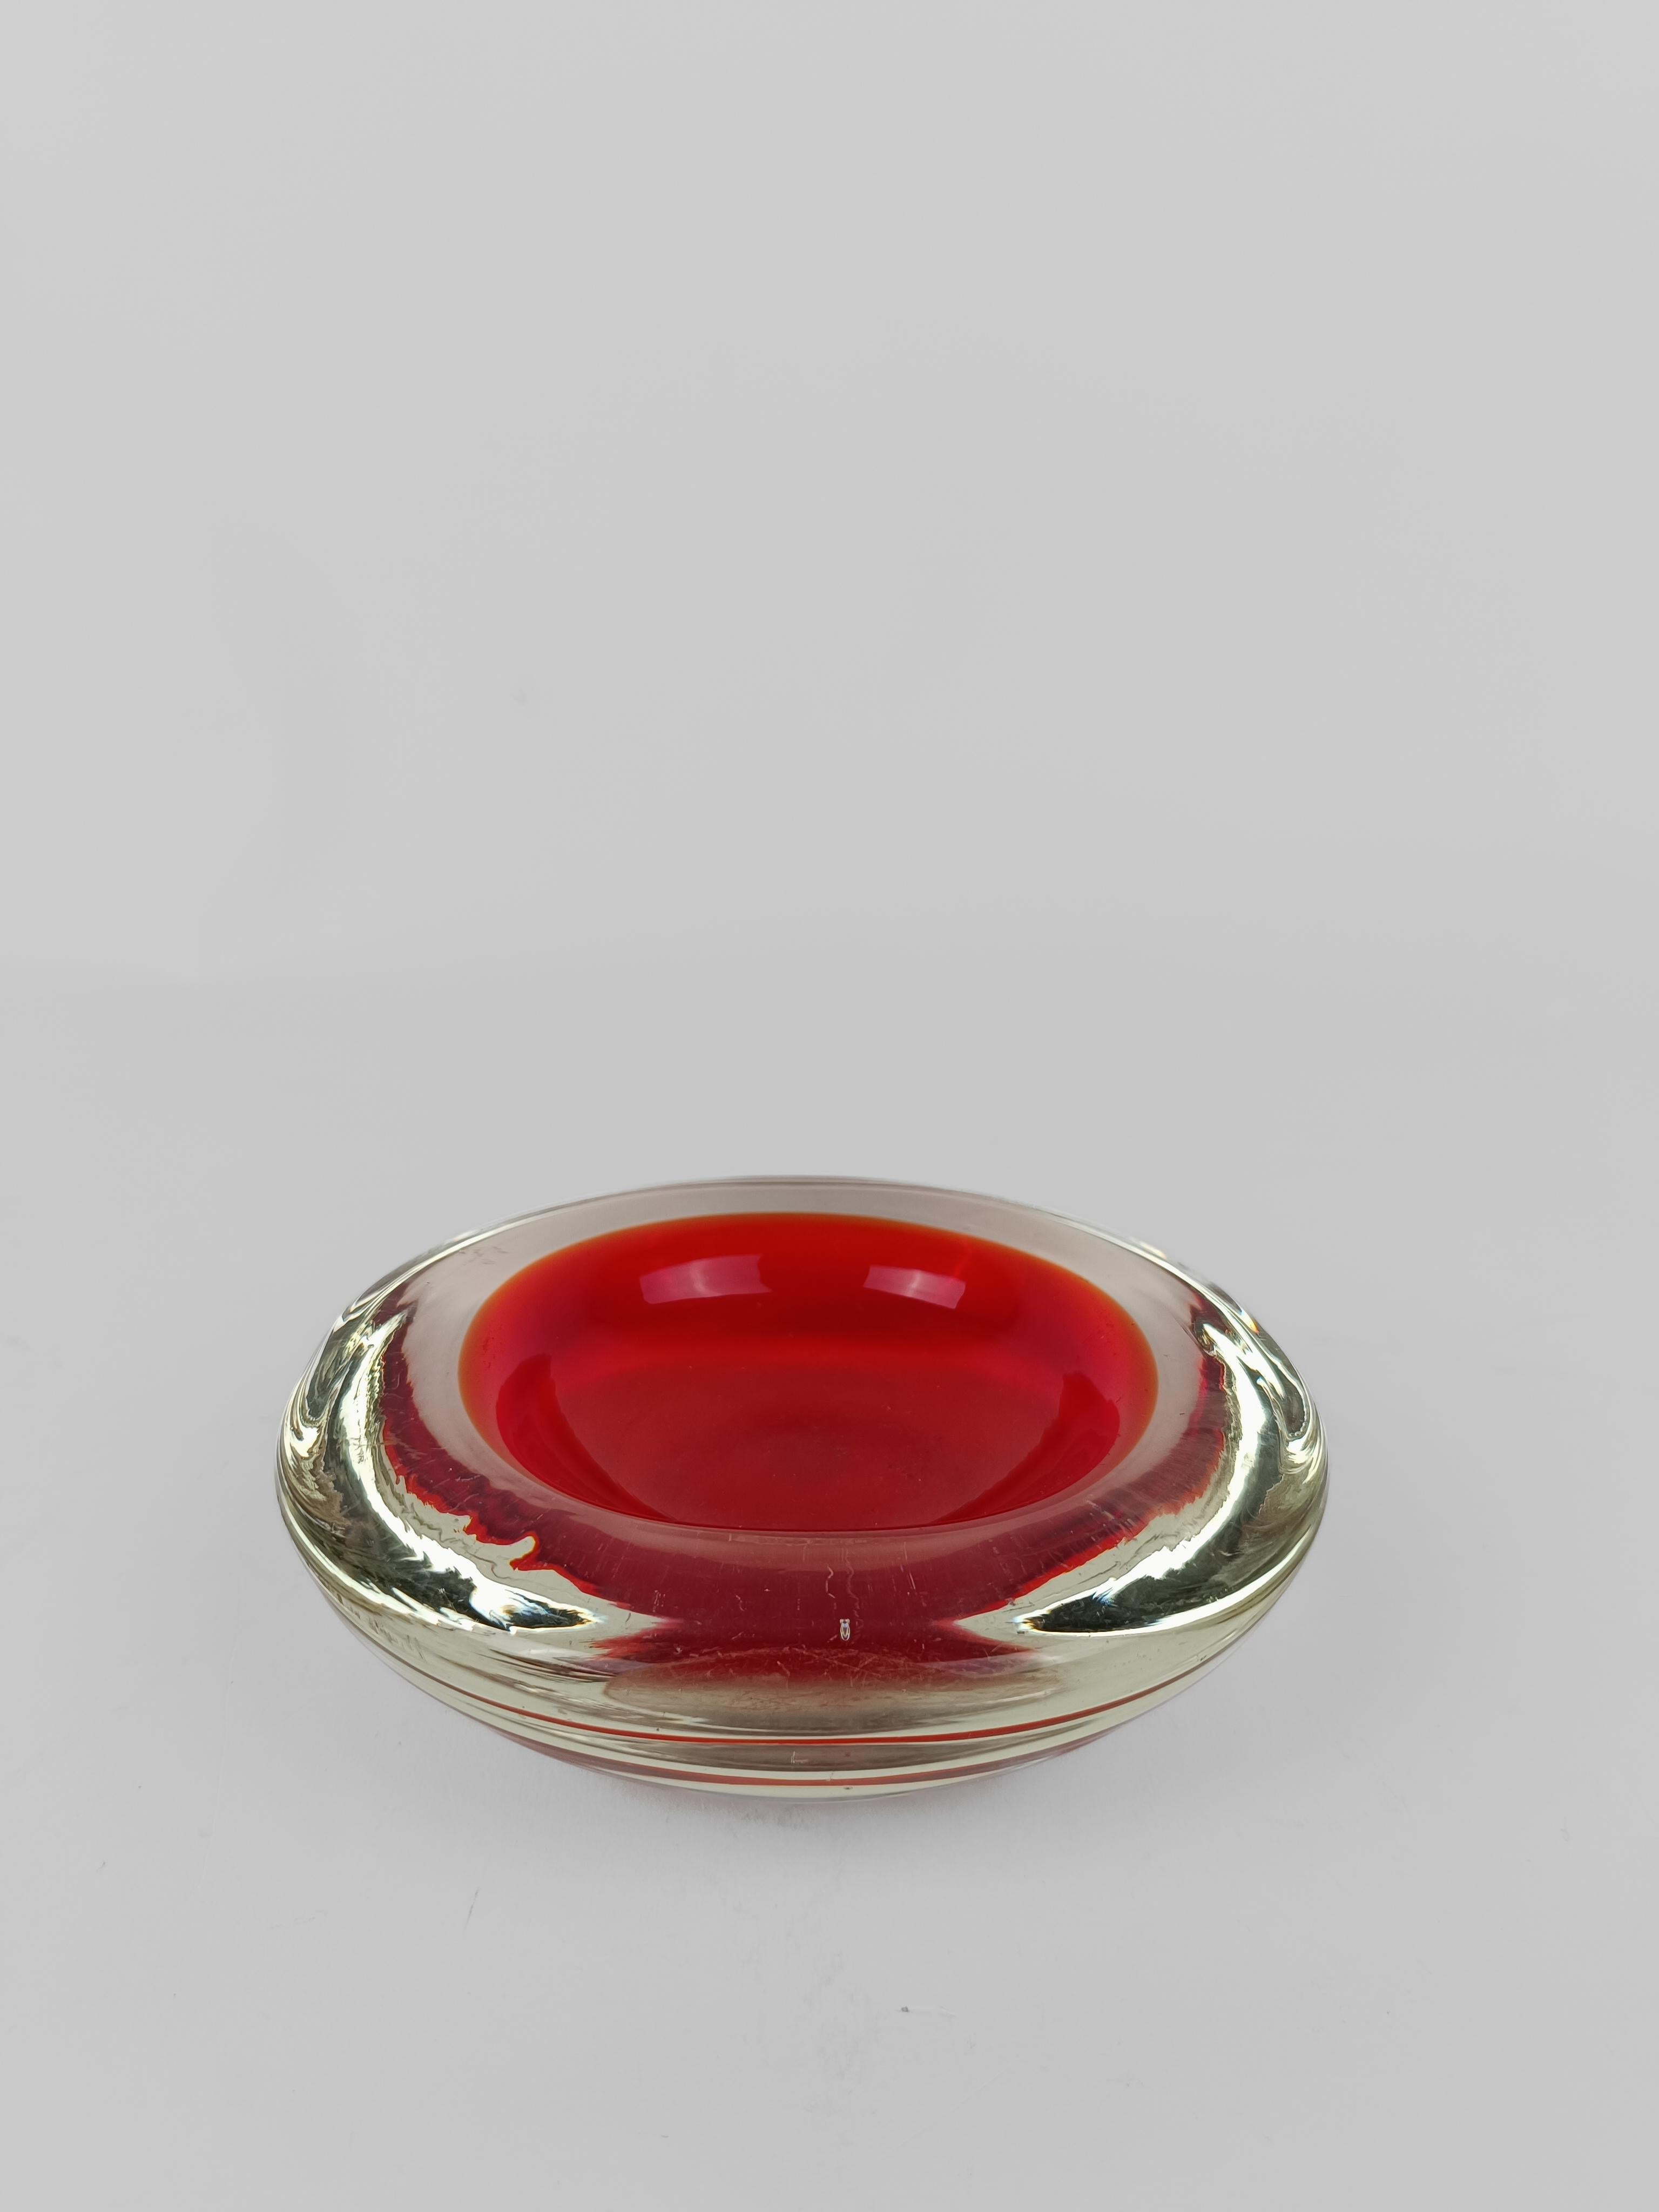 A collector's item, unique because it was handcrafted, like all the creations made by master glassmakers in Murano.

We offer for sale a bowl dating back to the 1960s and 1970s, made of transparent and red glass with the 